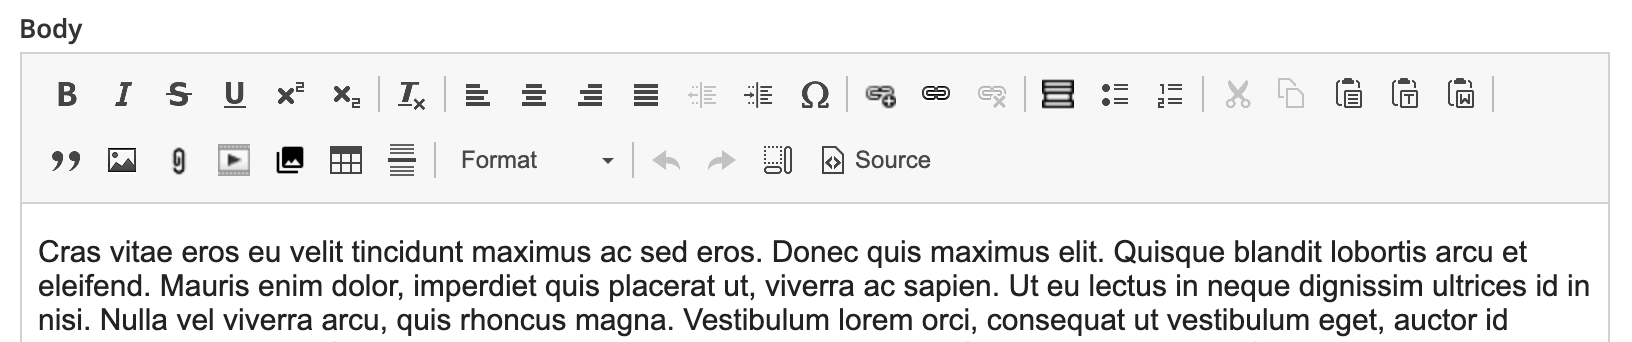 Drupal 8 body editor with toolbar and sample text.